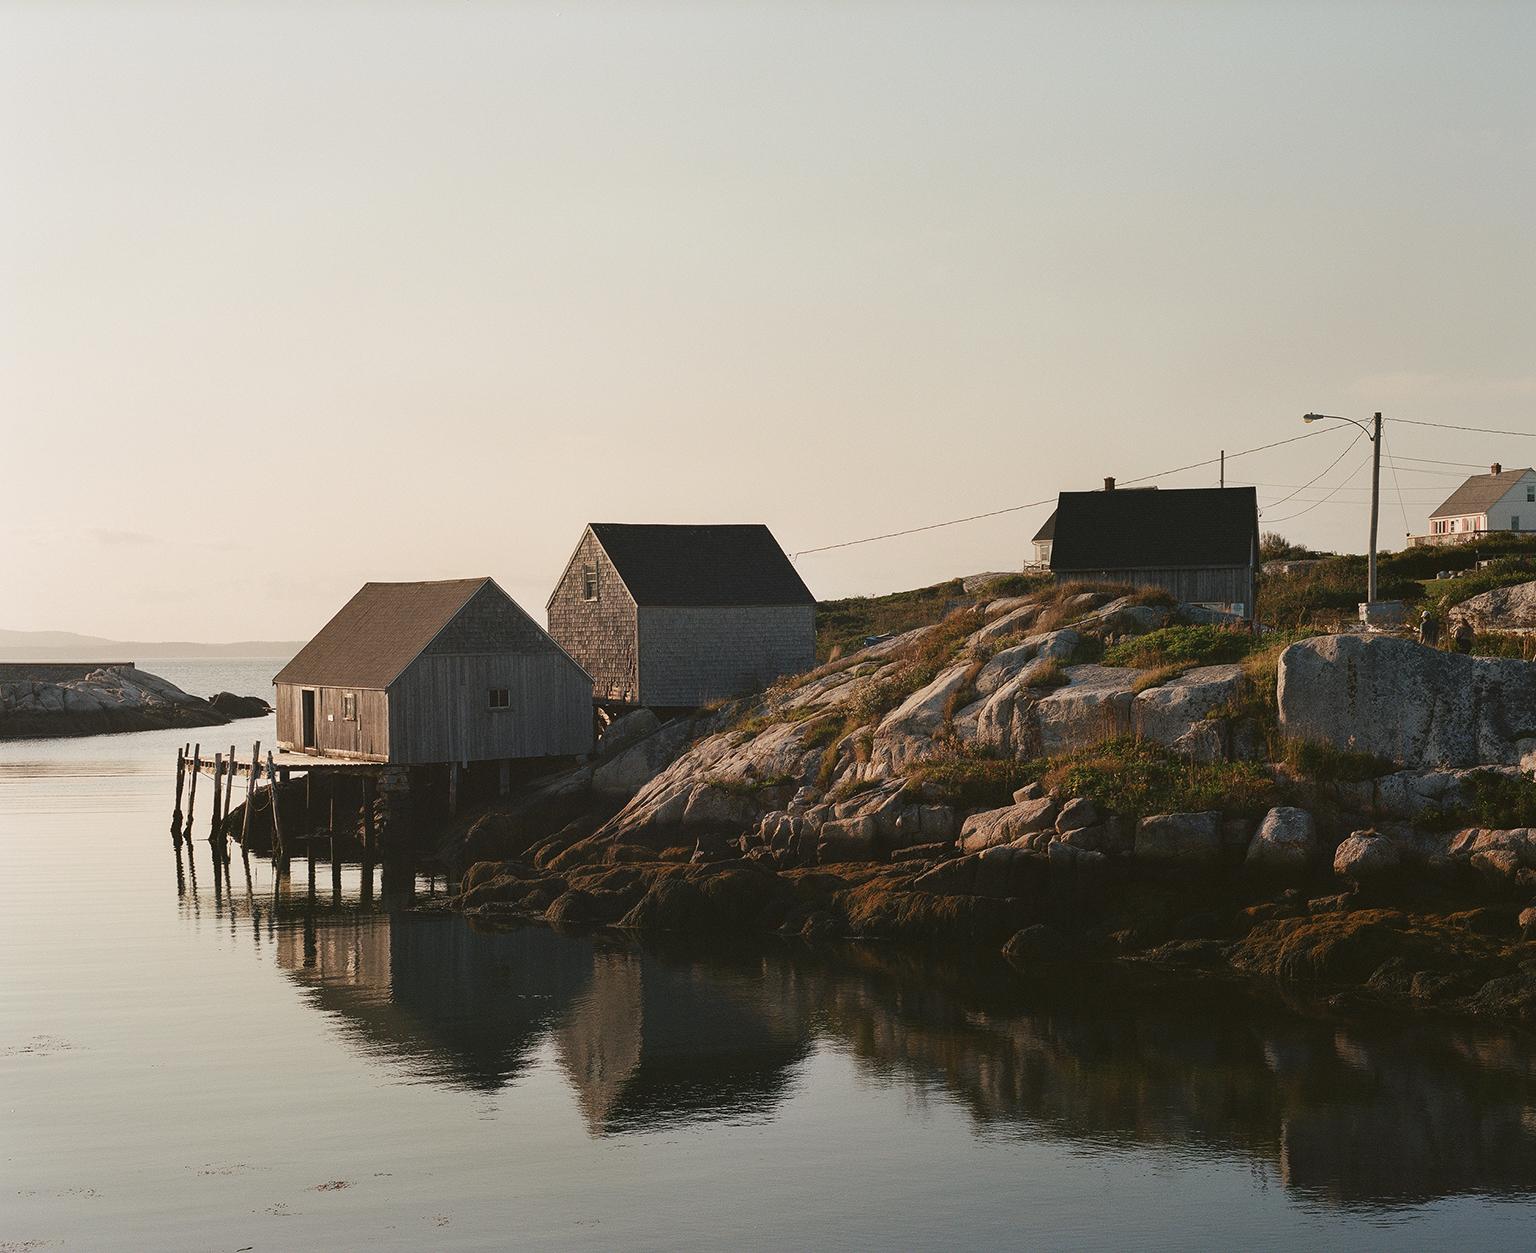 Peggy's Cove, Nova Scotia, Canada., 2021, Archival Dye Piment Print. 24” x 30”, Edition of 15.
_________________________________________________________________________________
Signed, Dated and Numbered on the Reverse.

Jim Ryce has focused on the